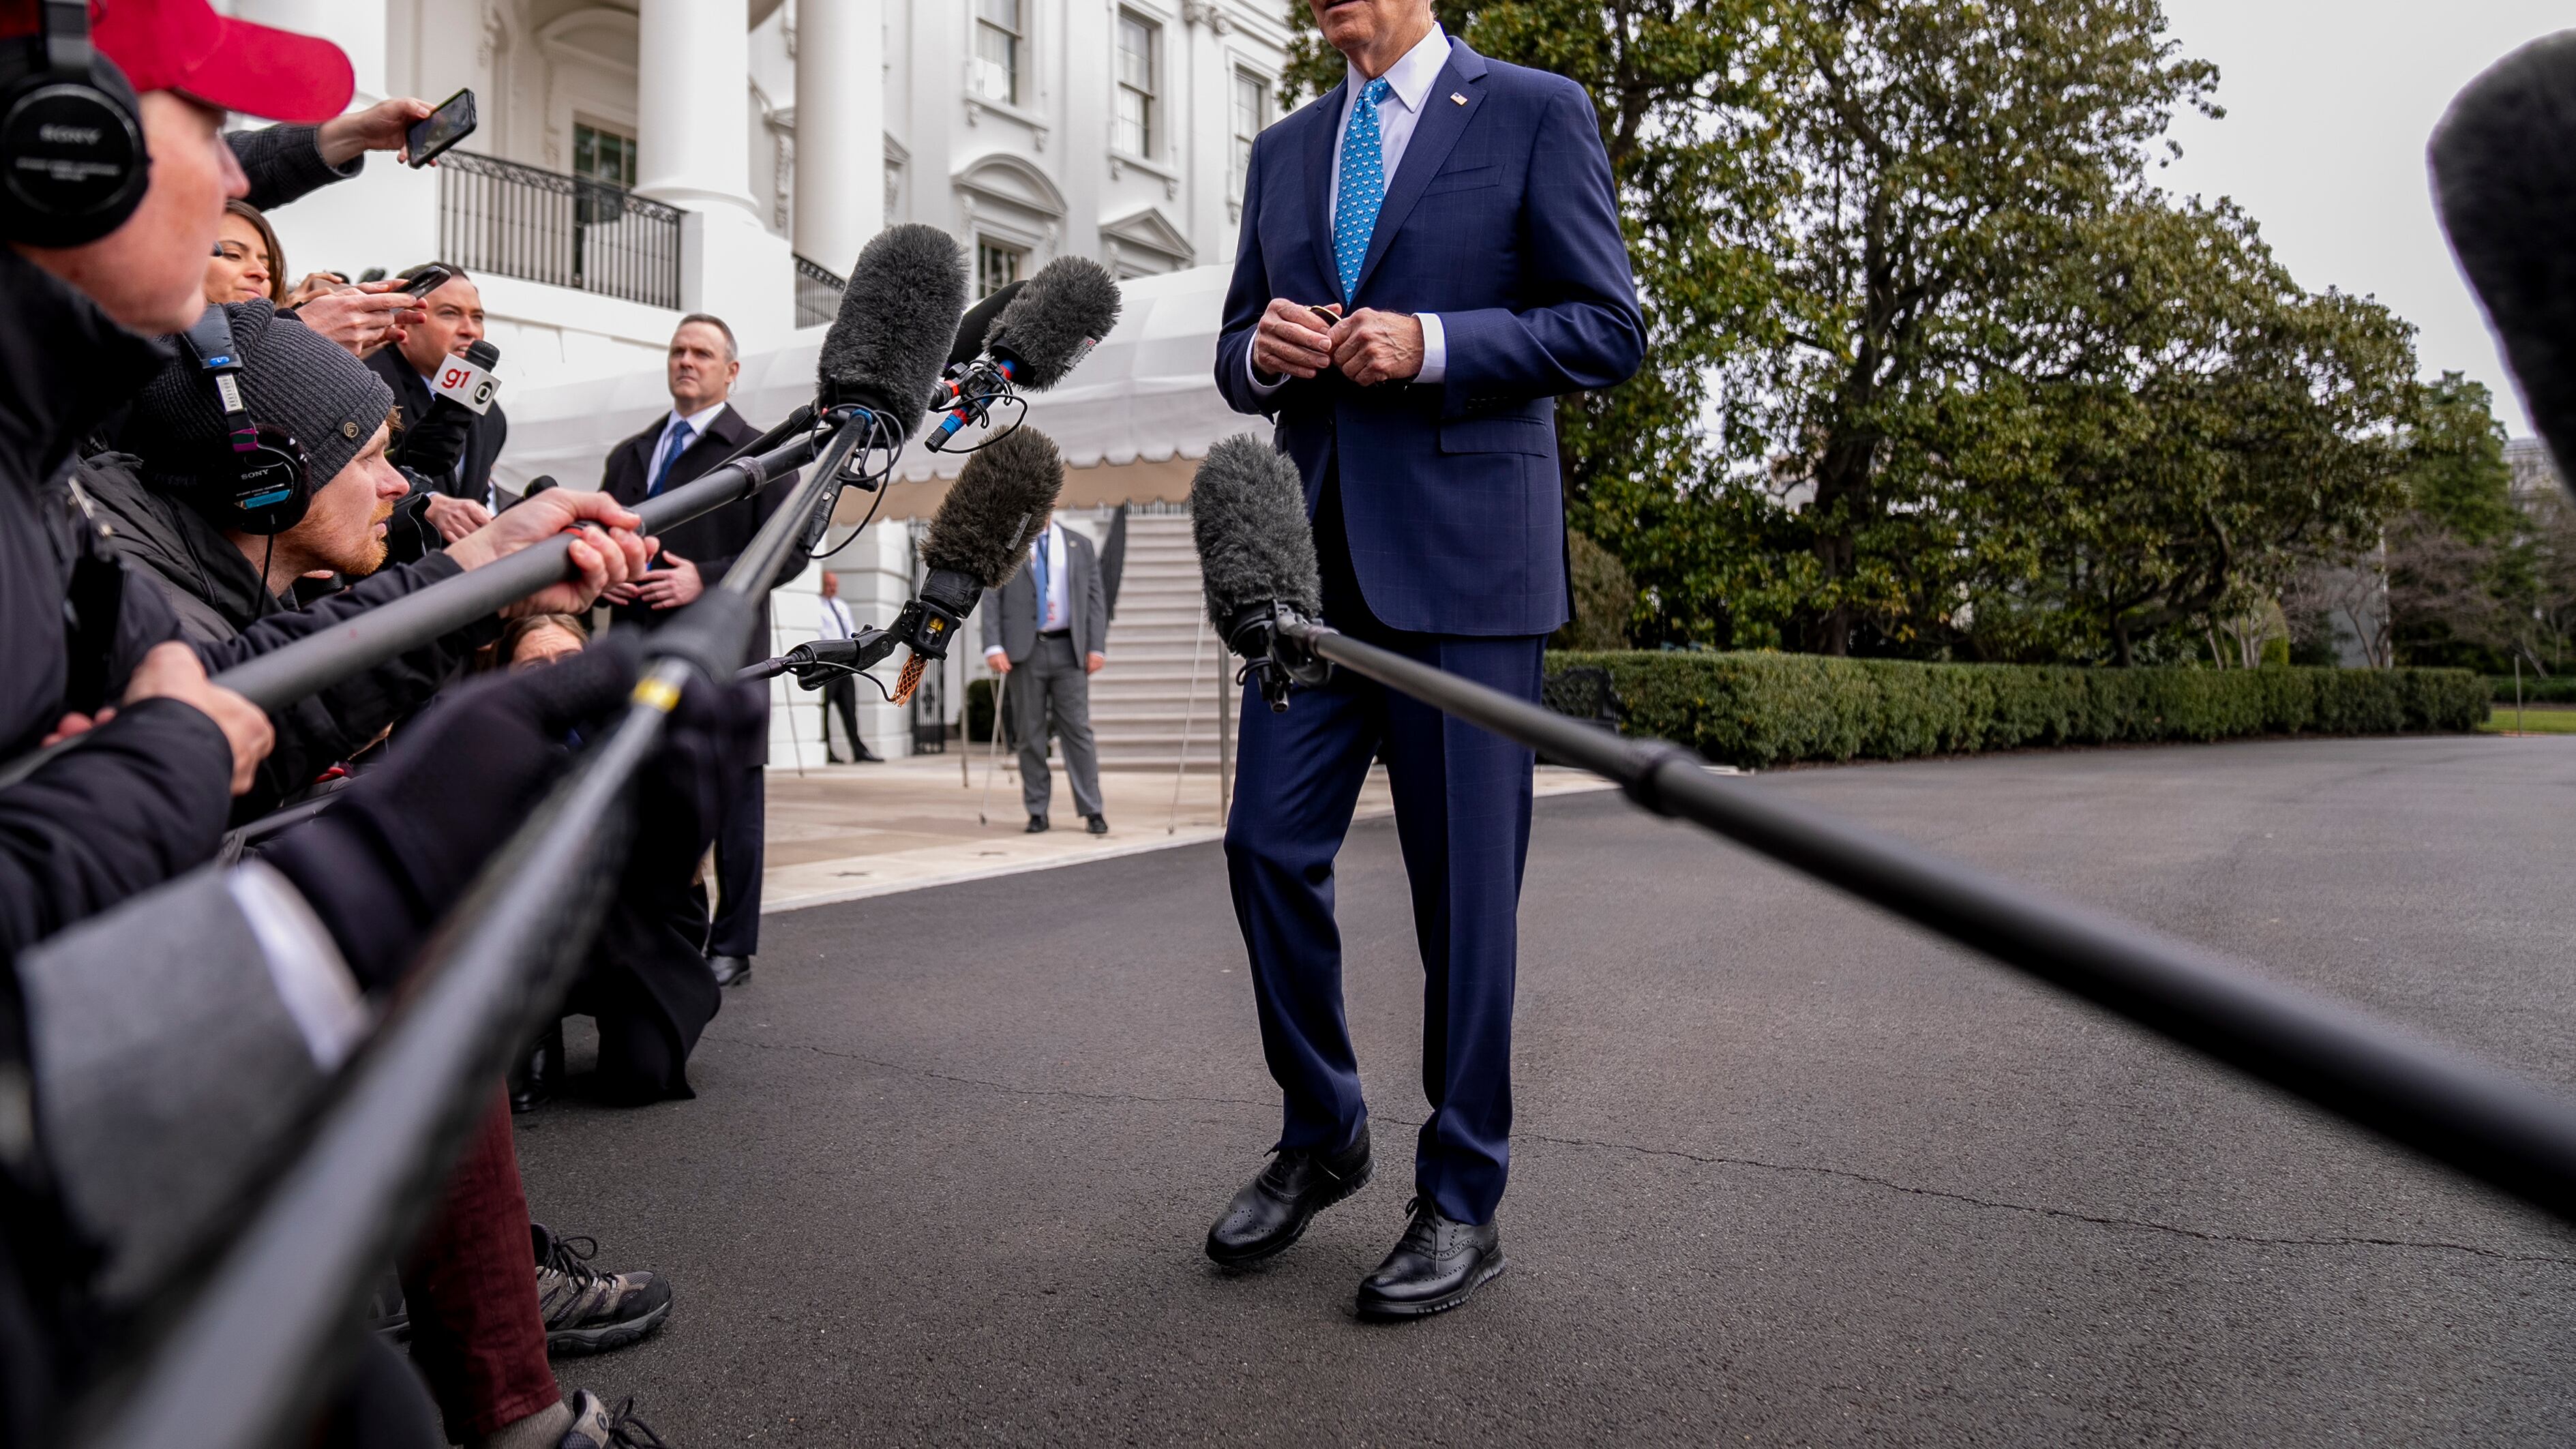 US President Joe Biden speaks to reporters before boarding Marine One on the South Lawn of the White House in Washington (Andrew Harnik/AP)